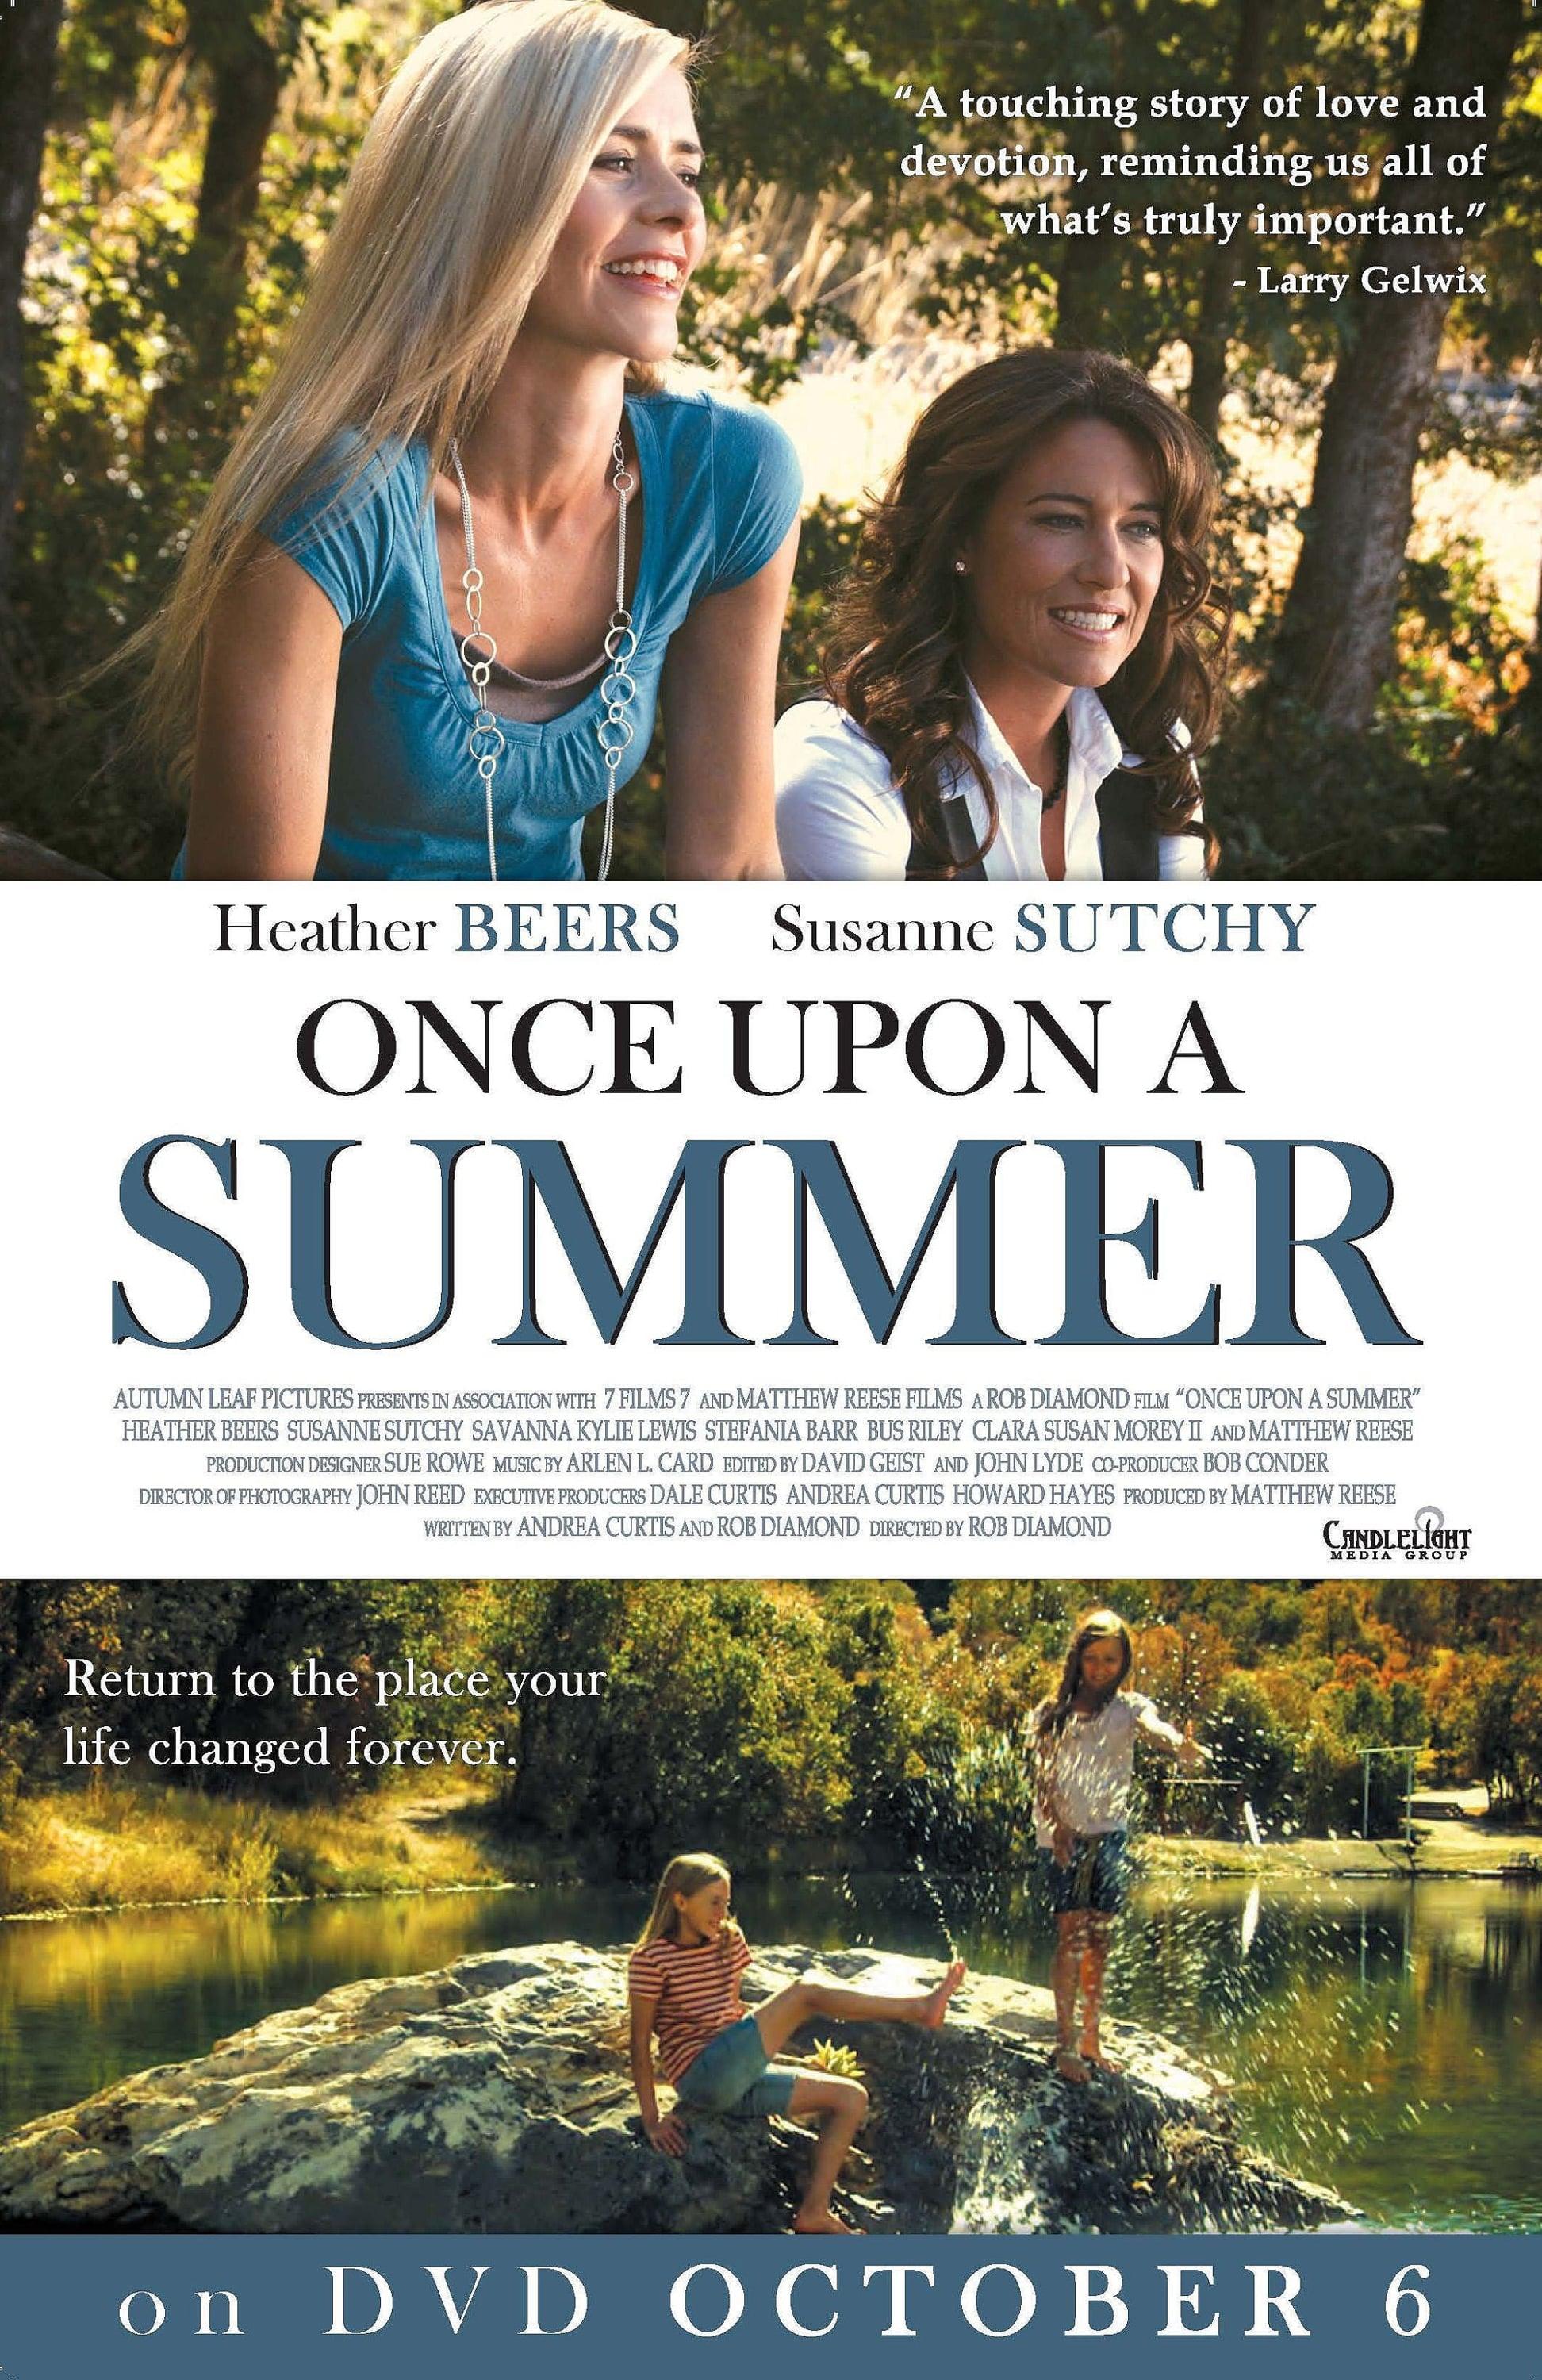 Once Upon a Summer poster